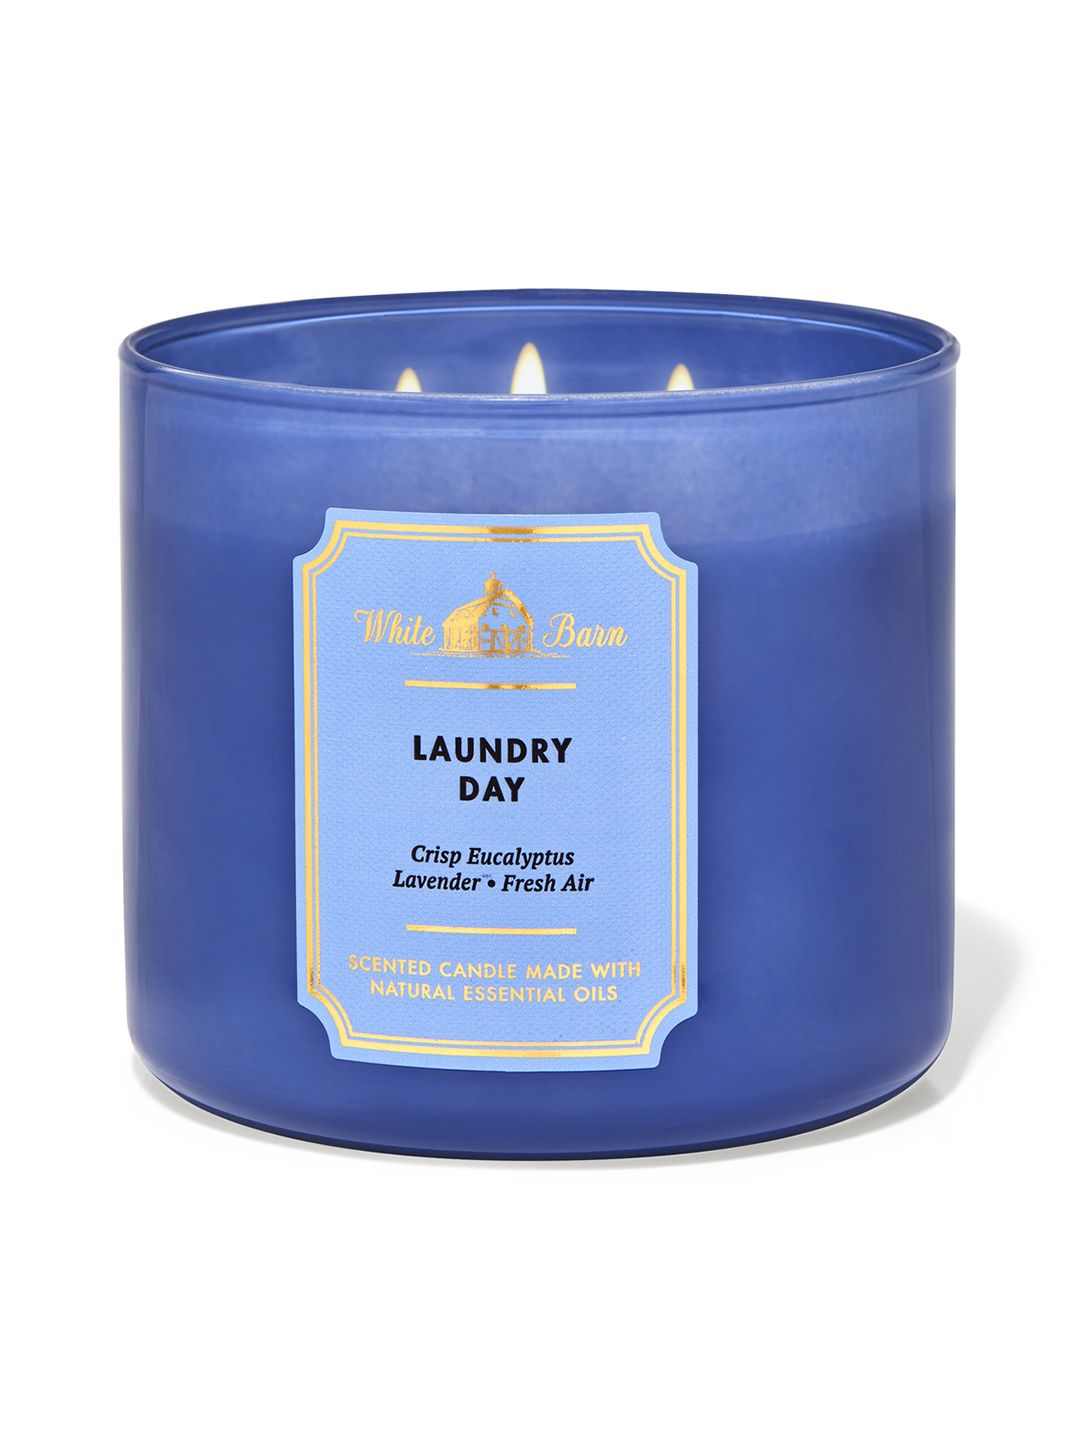 Bath & Body Works Laundry Day 3-Wick Scented Candle - 421 g Price in India